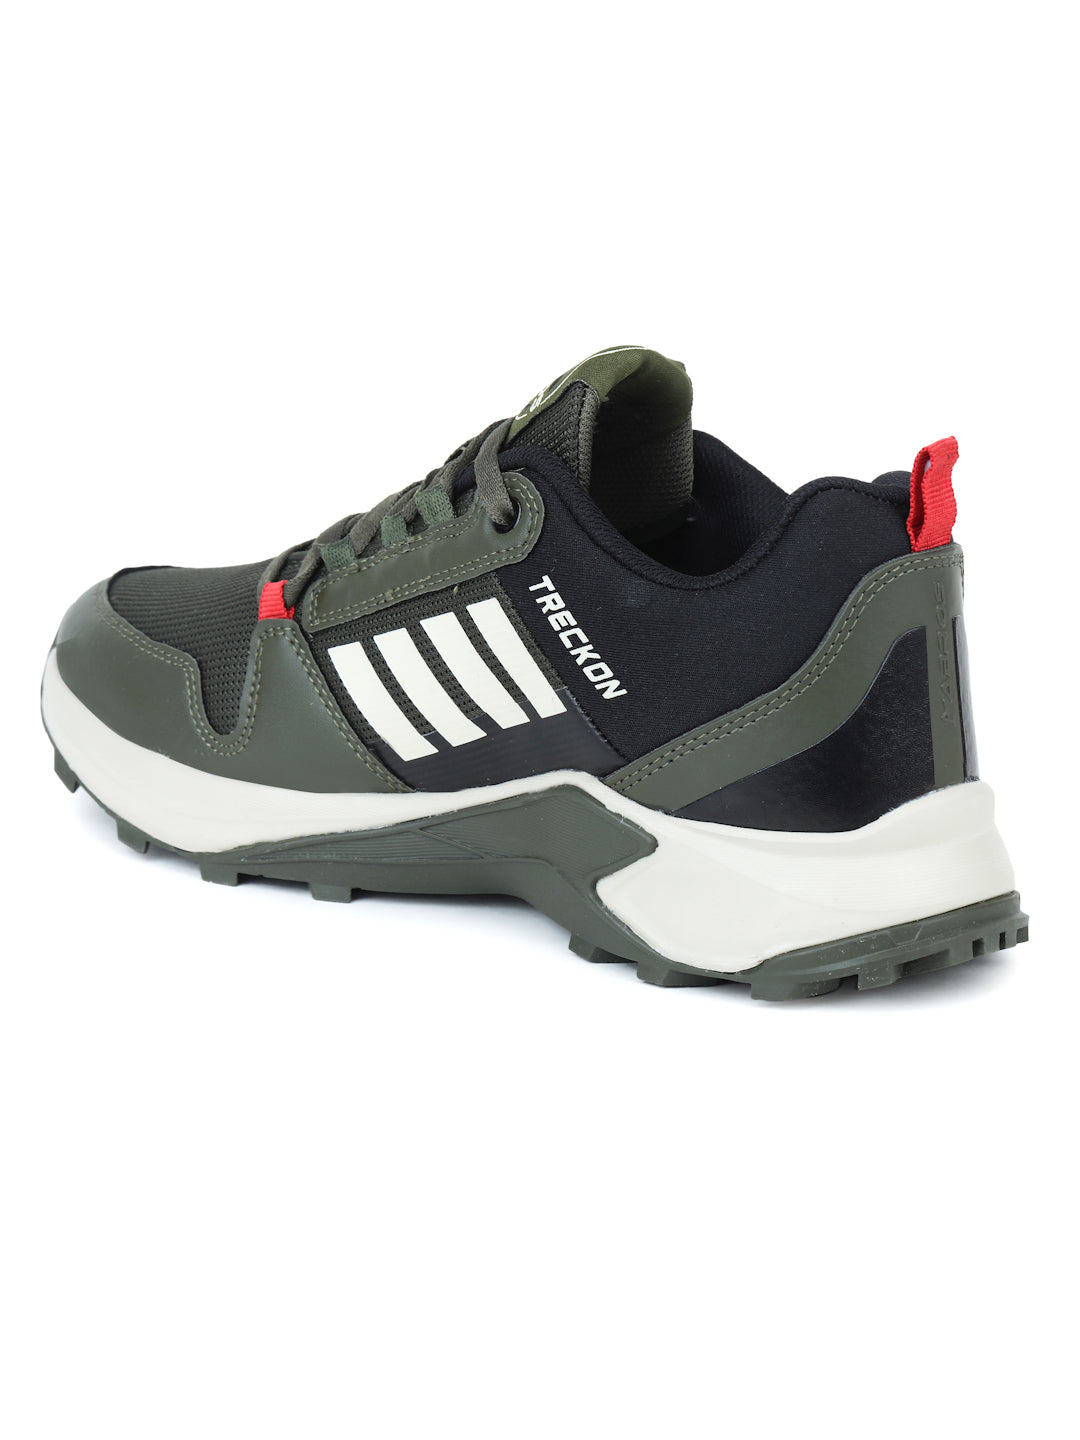 ABROS OYSTER SPORT-SHOES For MEN'S